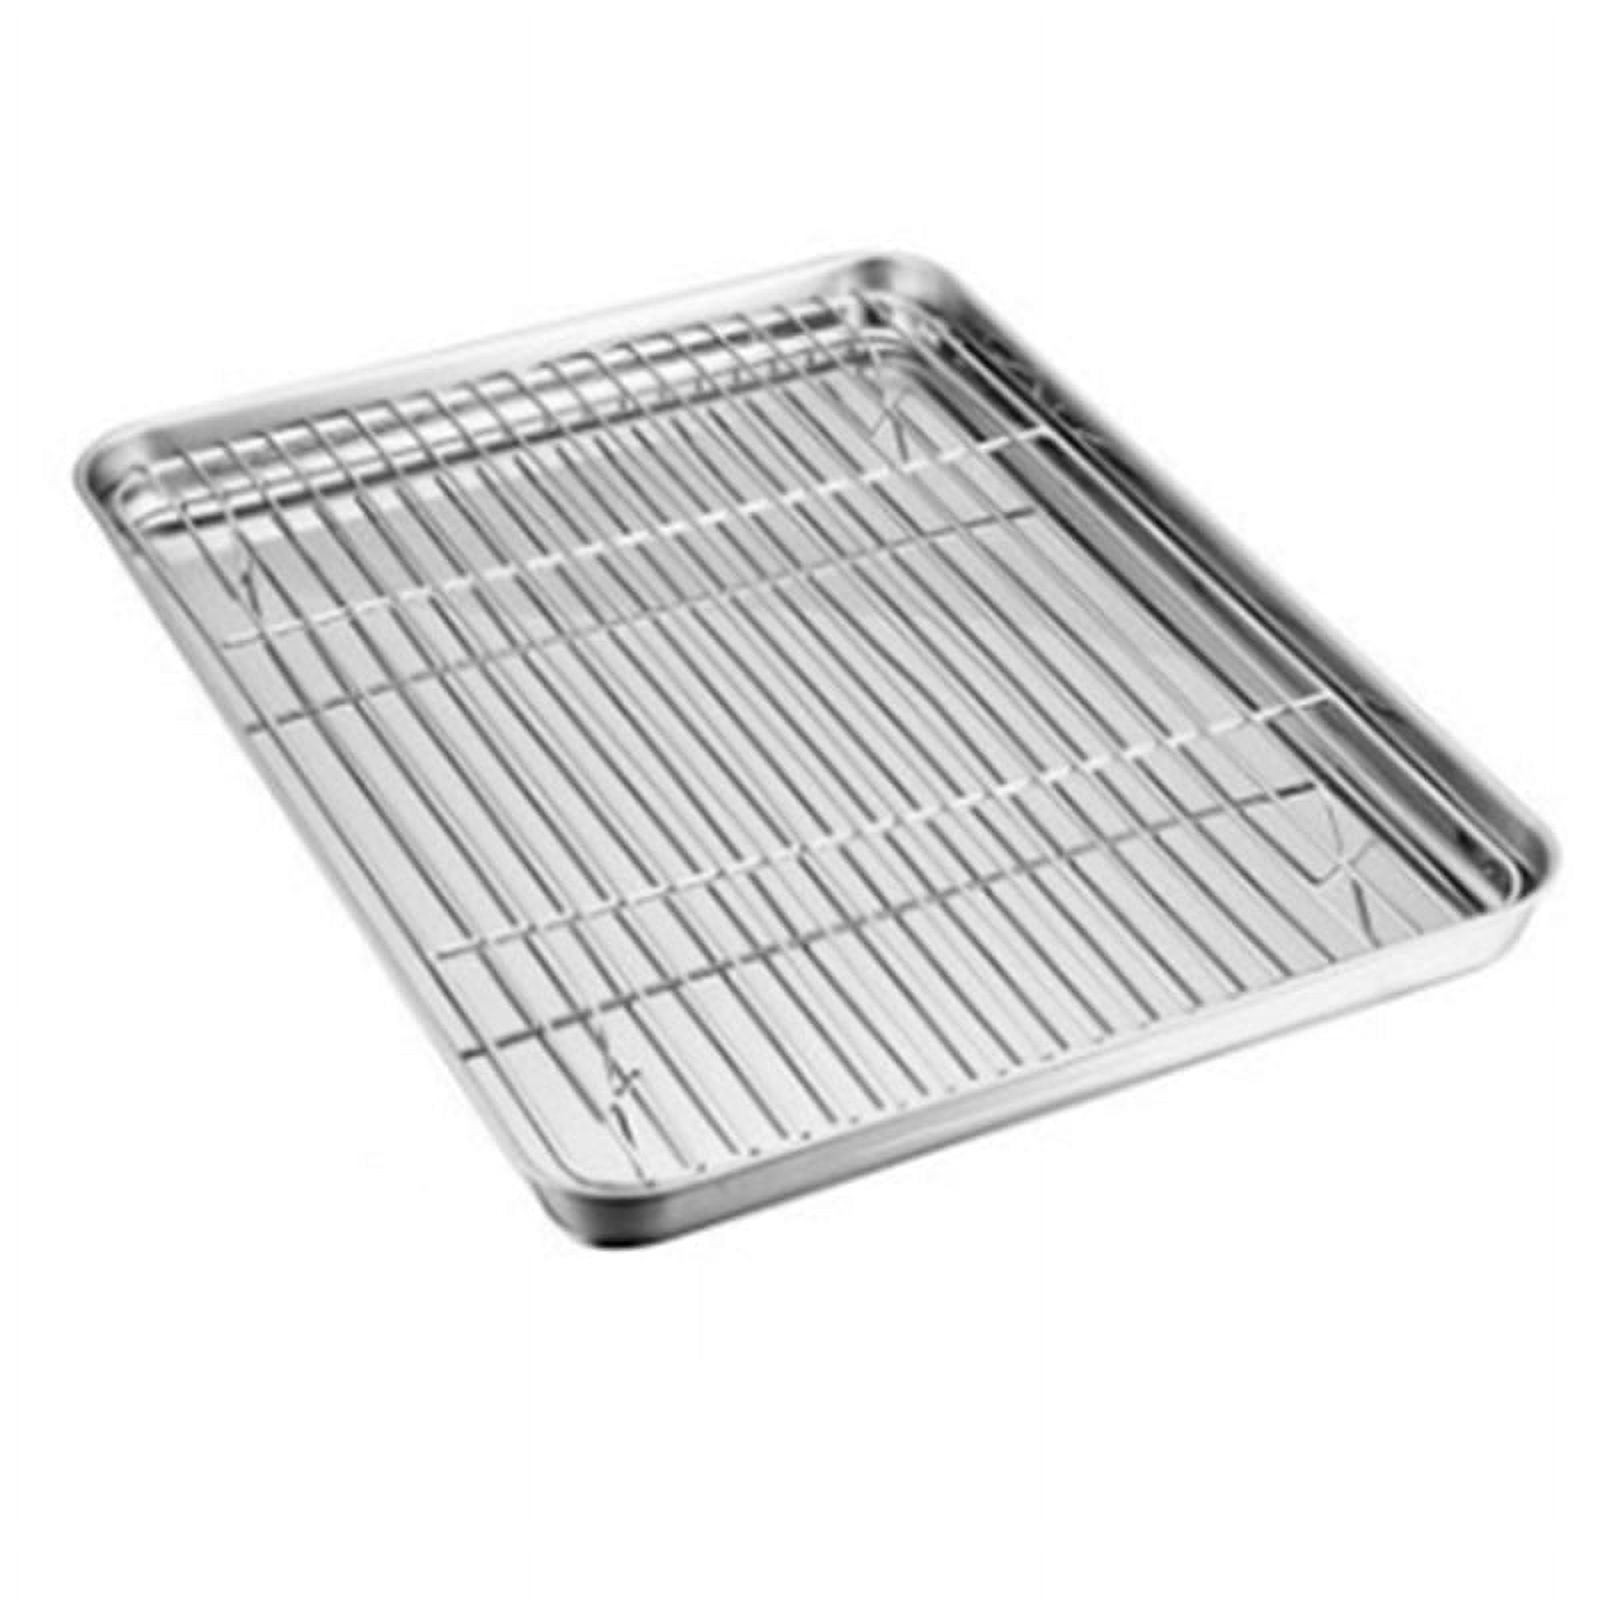  Sheet Pan,Cookie Sheet,Heavy Duty Stainless Steel Baking Pans,Toaster  Oven Pan,Jelly Roll Pan,Barbeque Grill Pan,Deep Edge,Superior Mirror  Finish, Dishwasher Safe By meleg otthon: Home & Kitchen